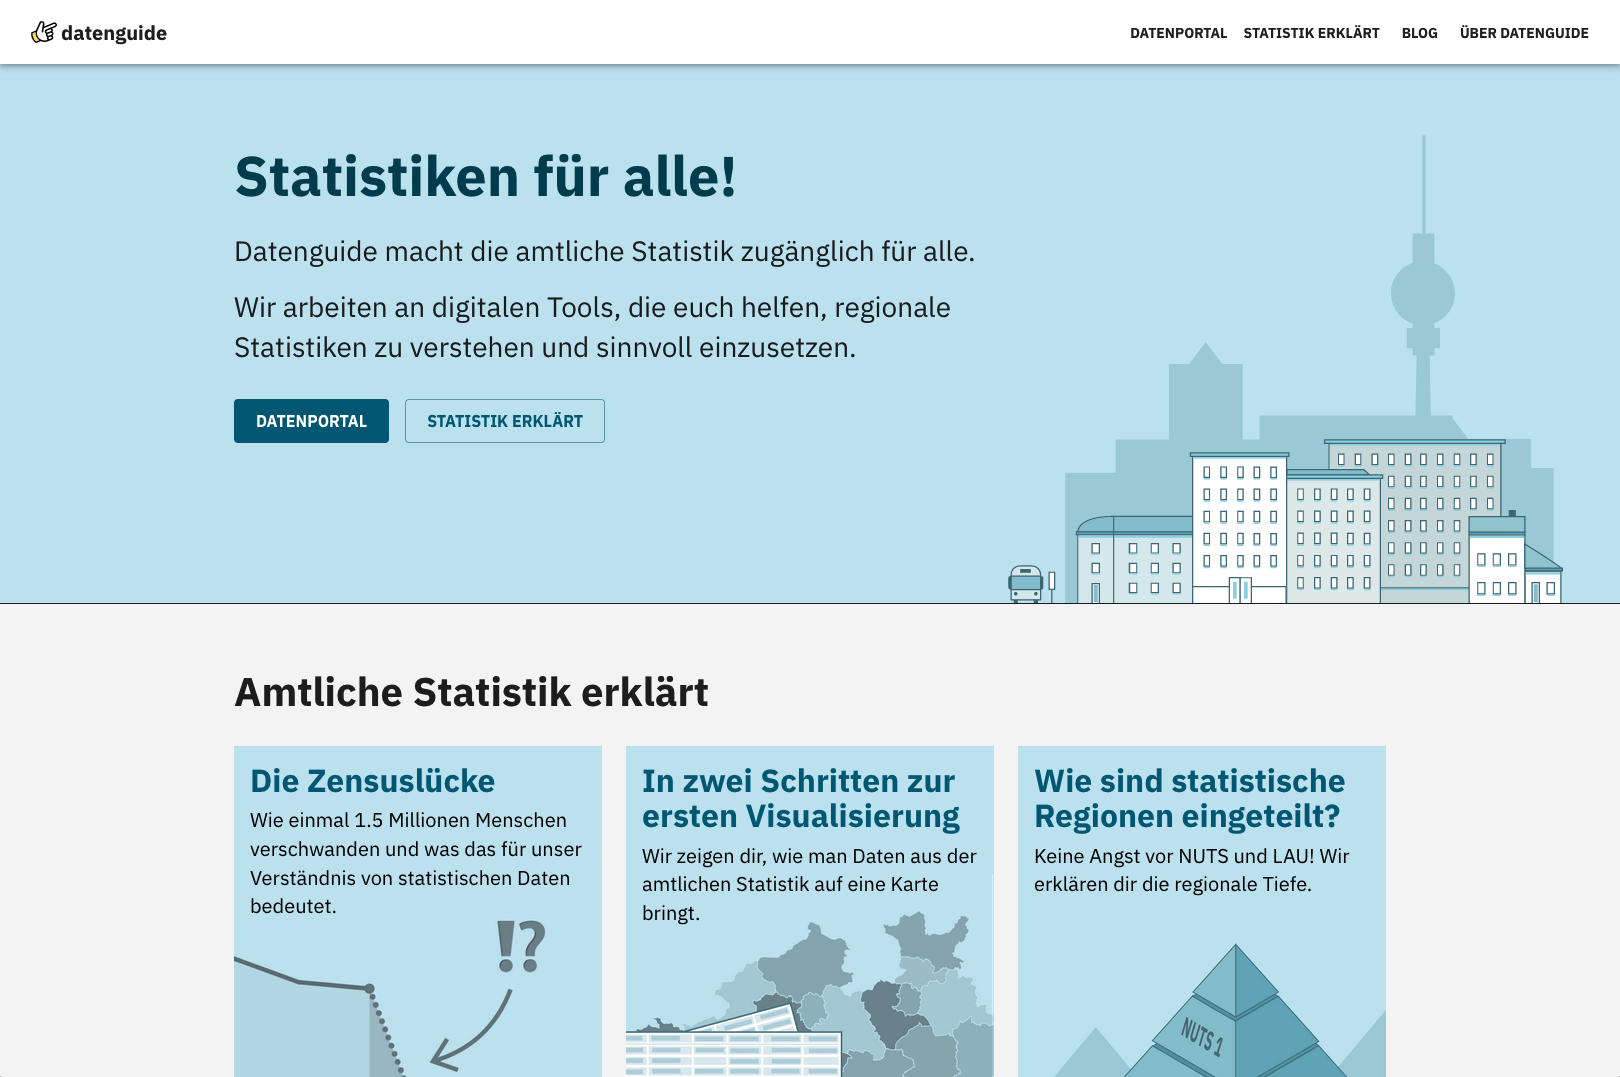 Screenshot from Datenguide homepage, showing teasers for multiple articles about public statistics